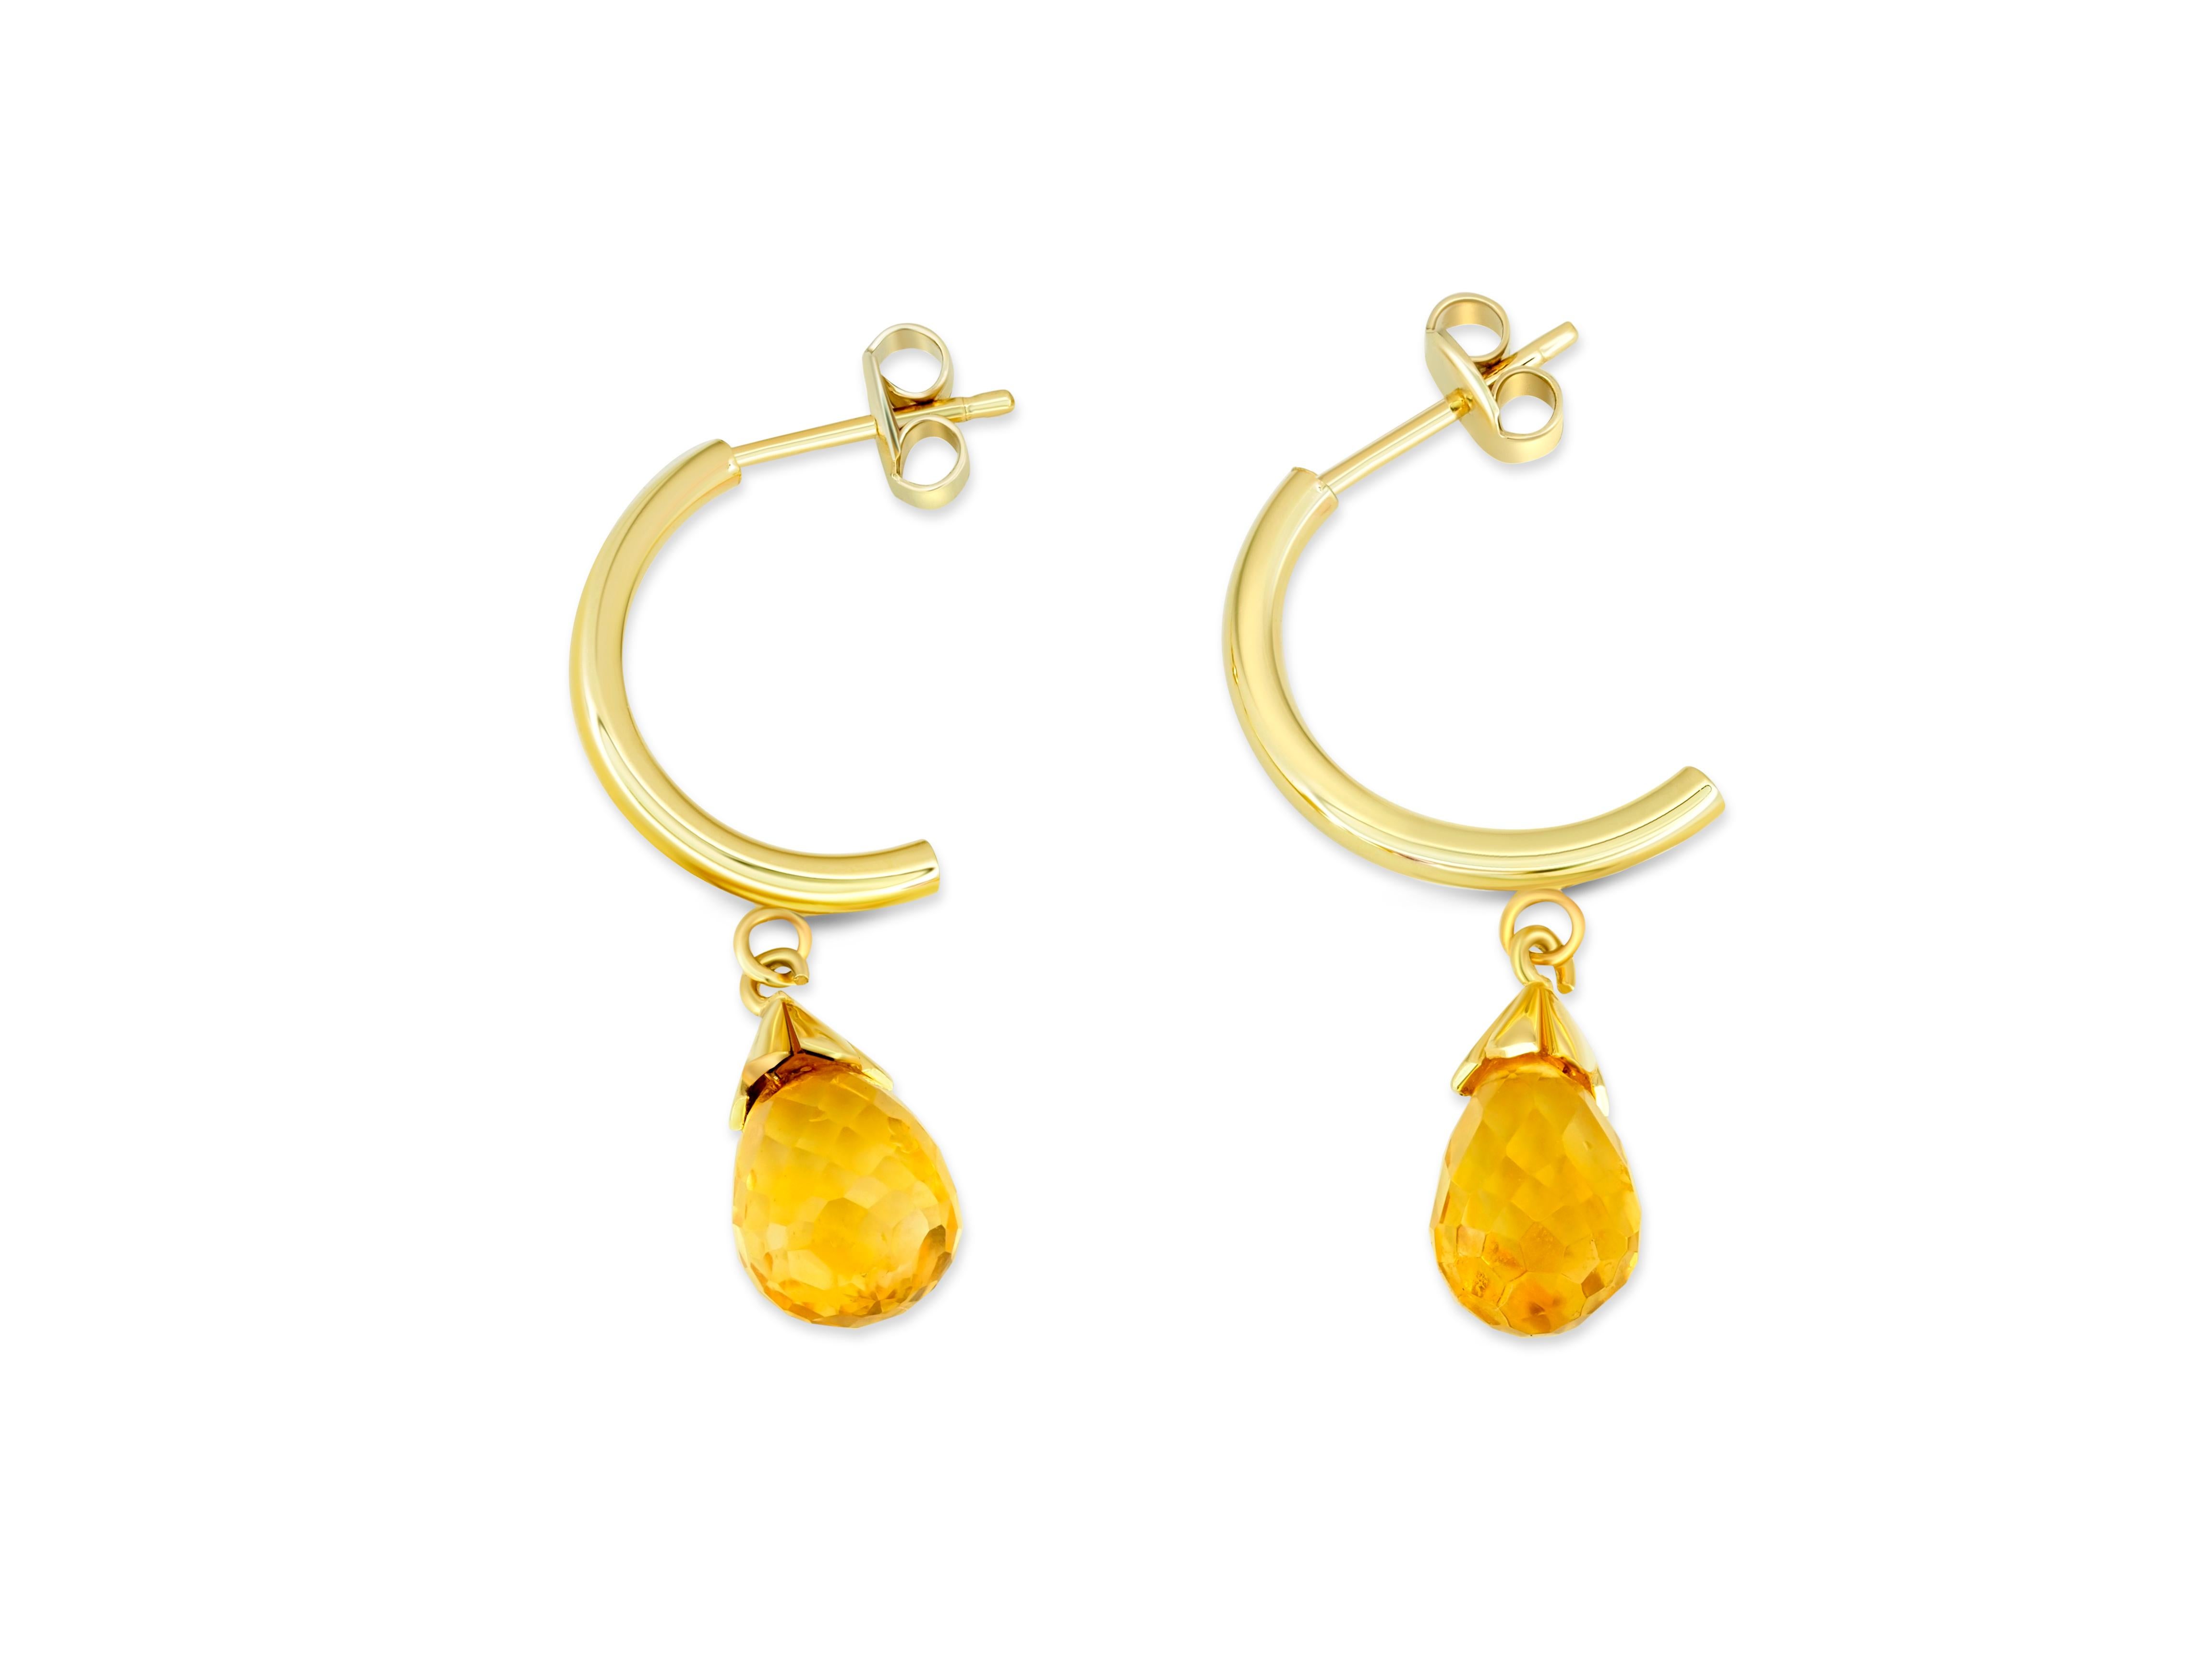 Citrine Briolette Drop Hoop Post Earrings in Yellow 14k Gold. 
Citrine huggy hoop earrings.Citrine Briolette Drop Hoop Earrings in 14k Gold.

Total weight: 2.4 g. 
Gold - 14k gold
Size: 23 mm - without briolette. 32 mm total with briollette.